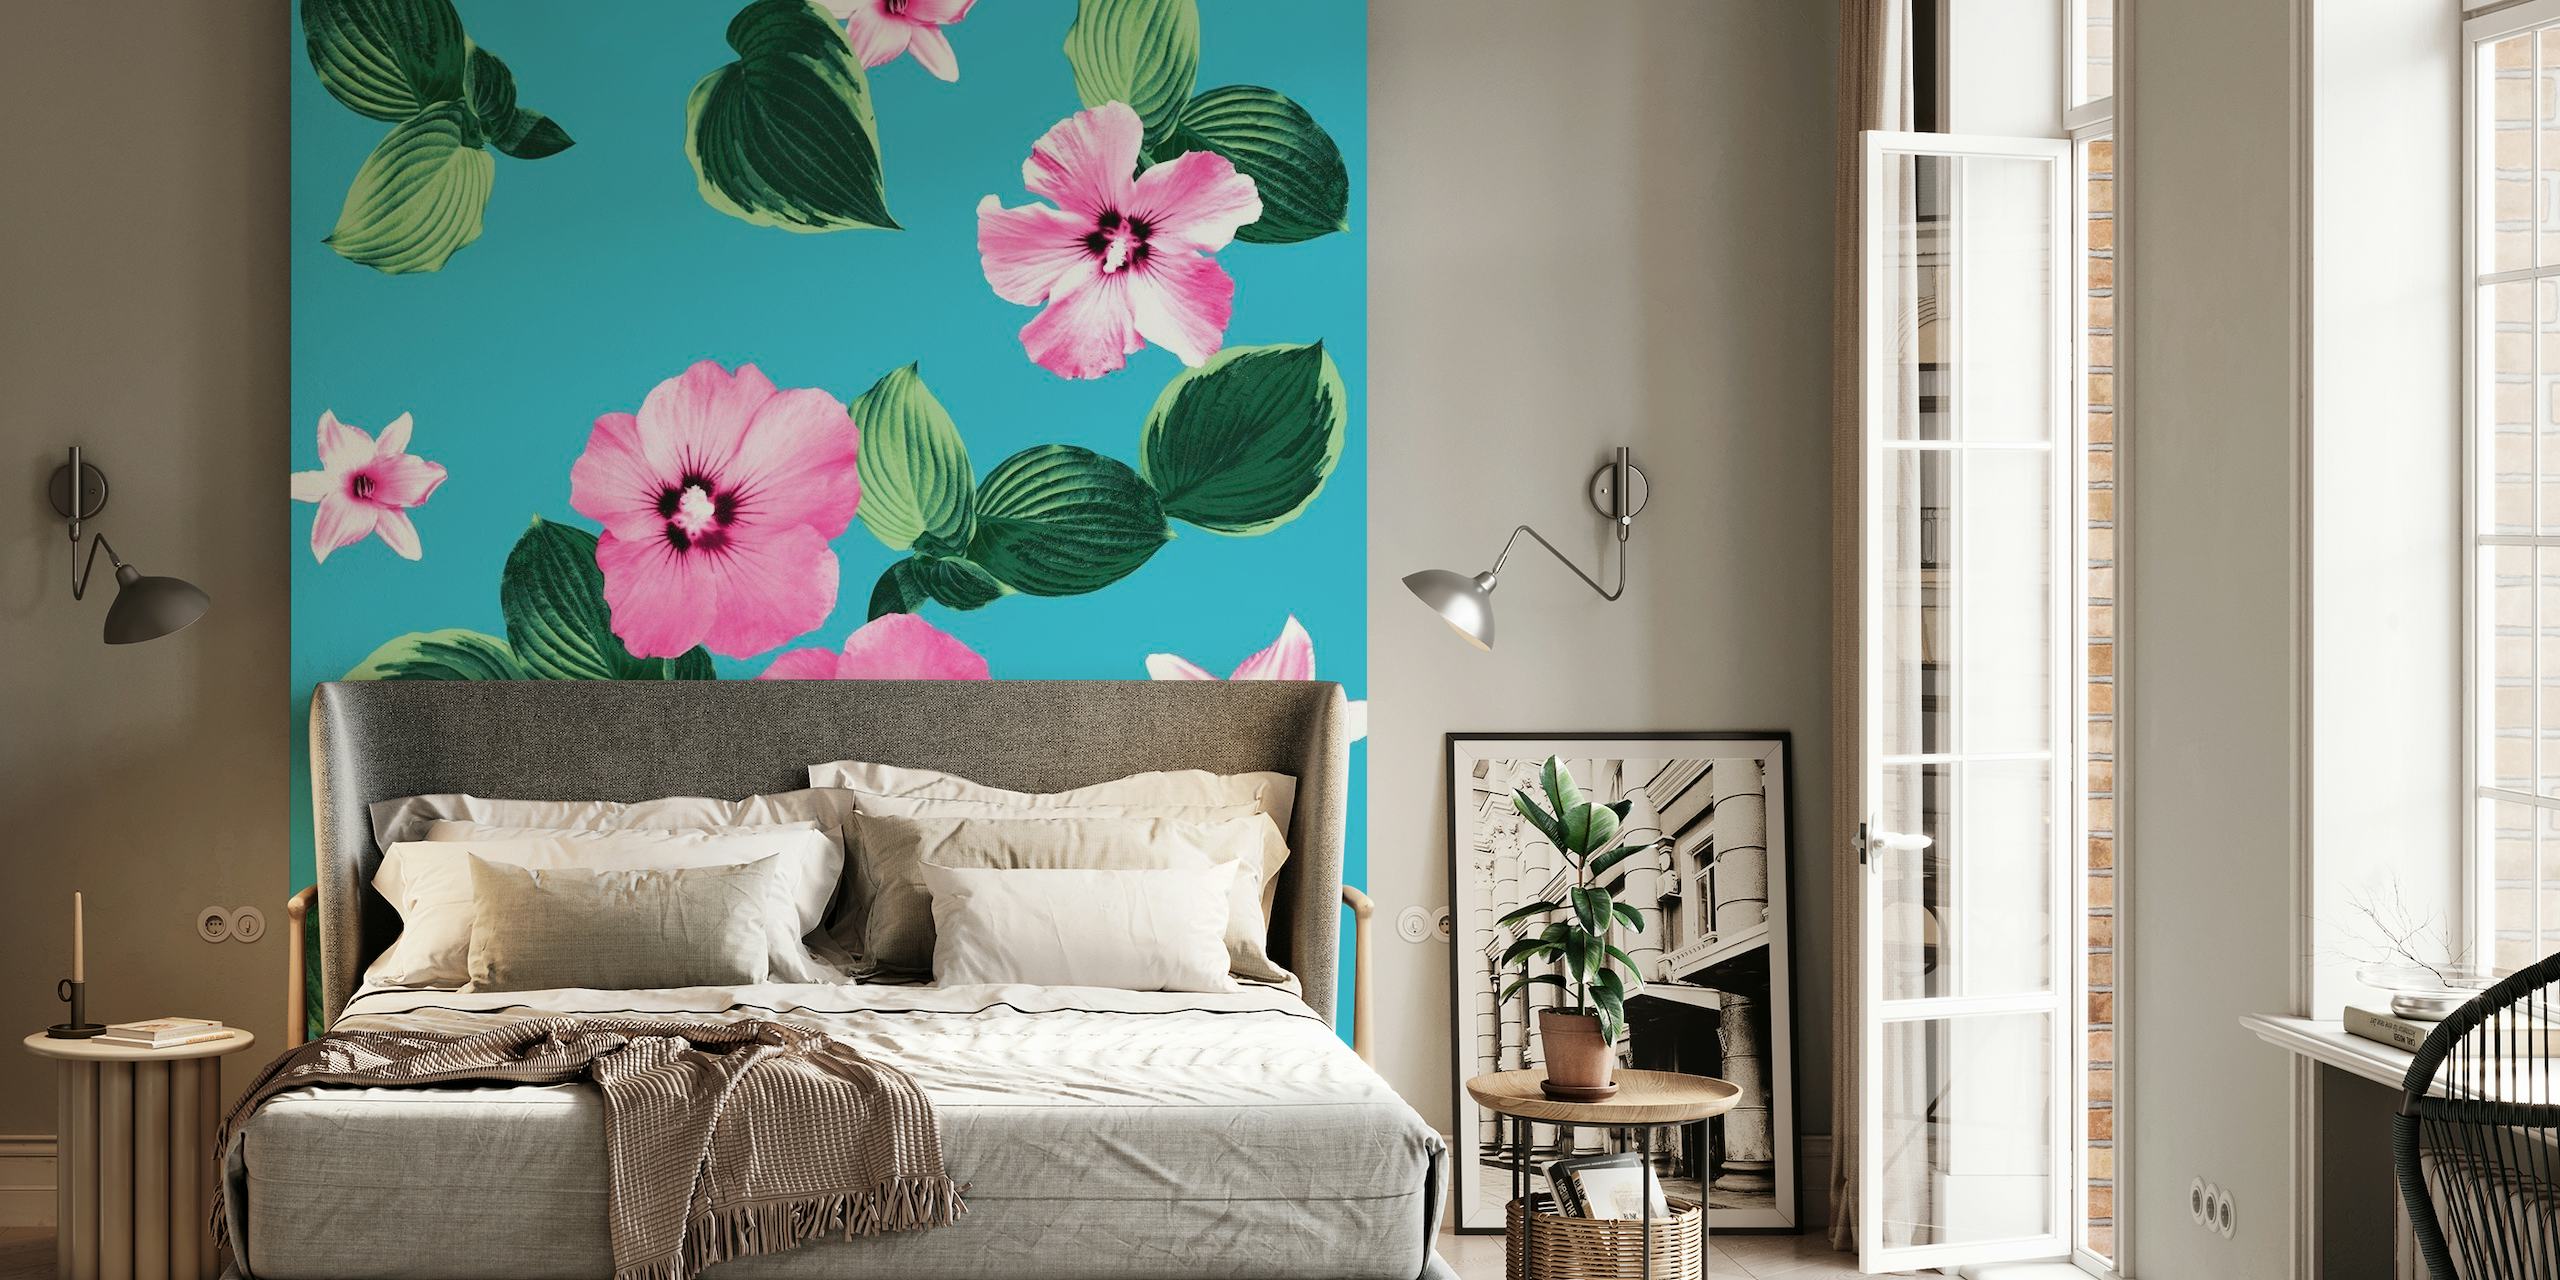 Pink and green floral patterns on a blue background wall mural